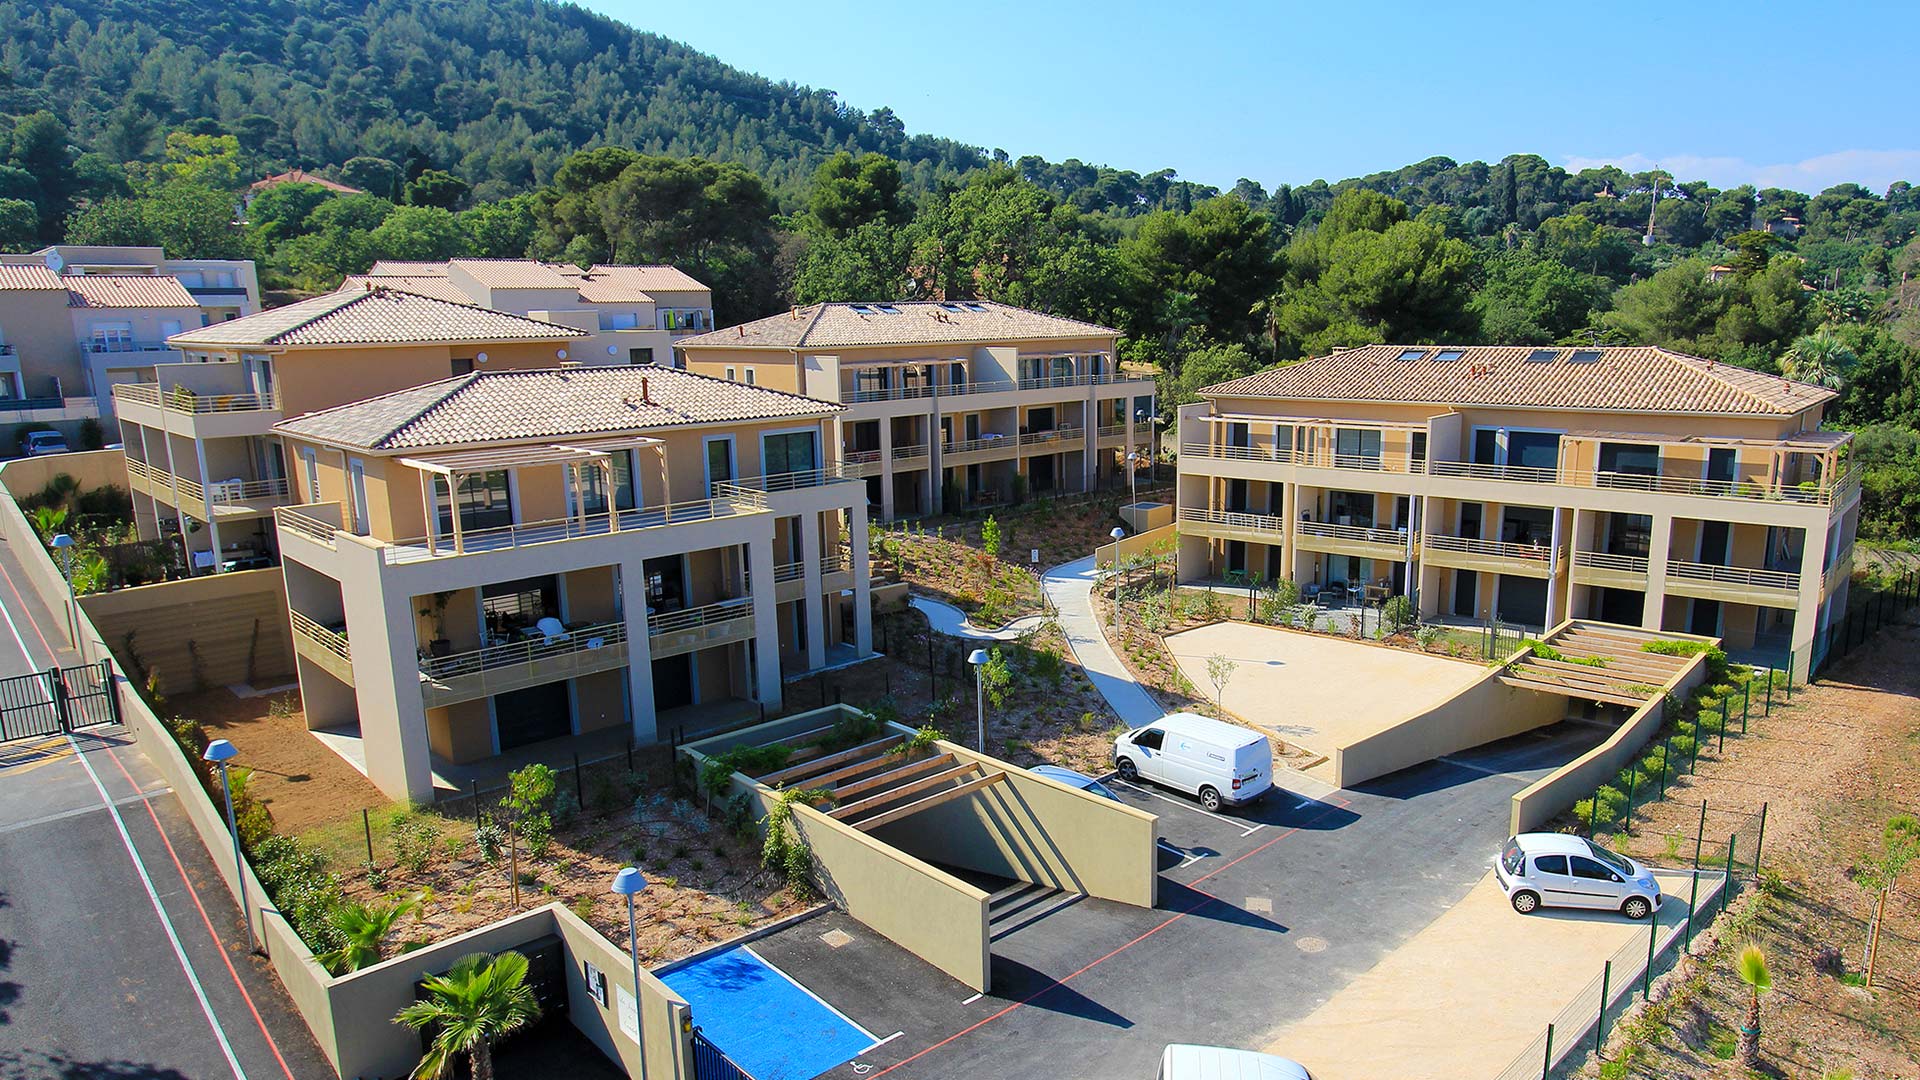 New apartments in Hyeres